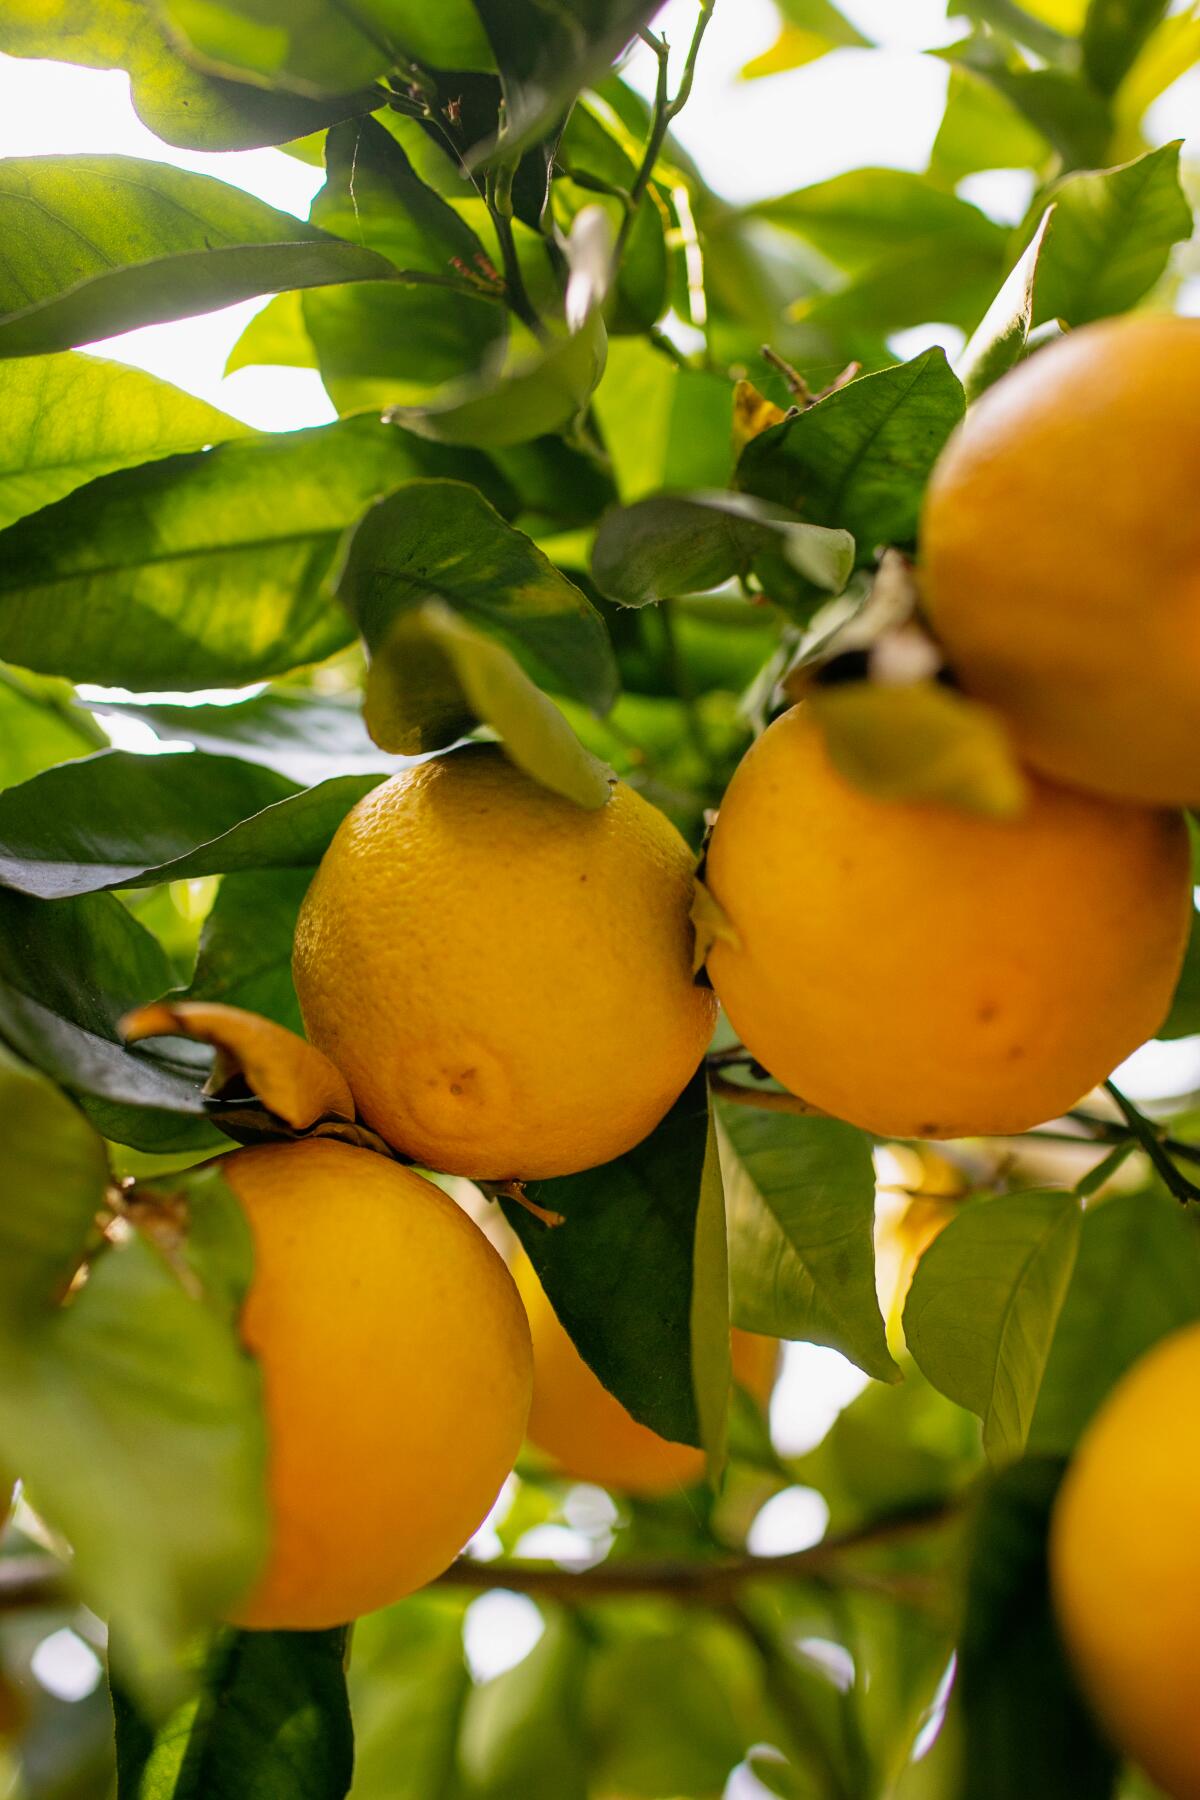 Detail of oranges hanging from a tree branch.